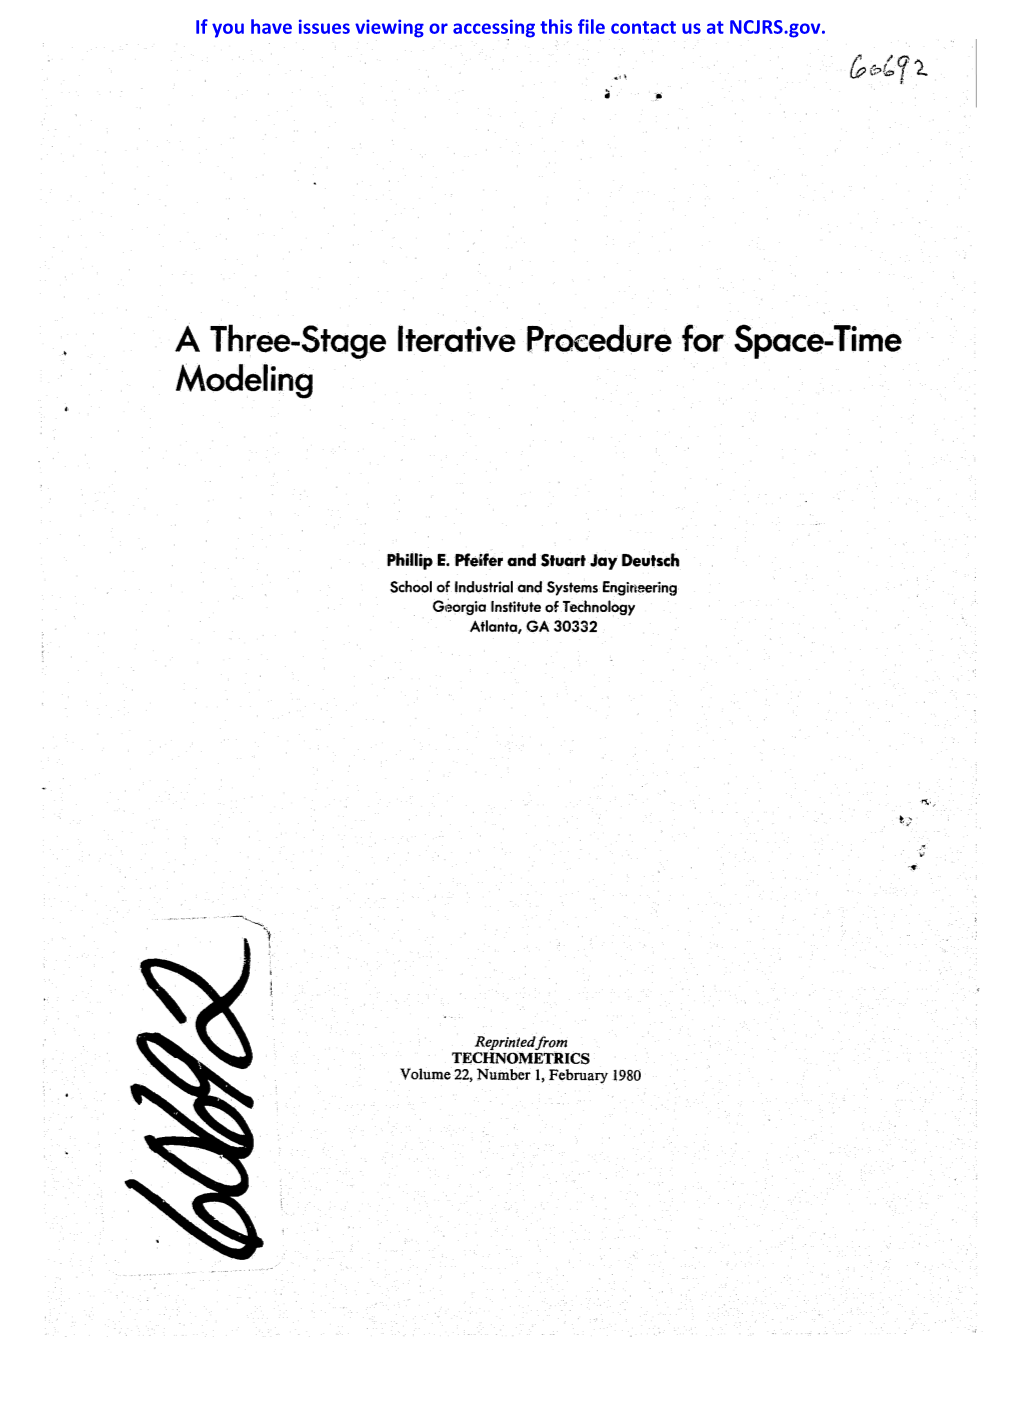 A Three-Stage Iterative Procedure for Space-Time Modeling